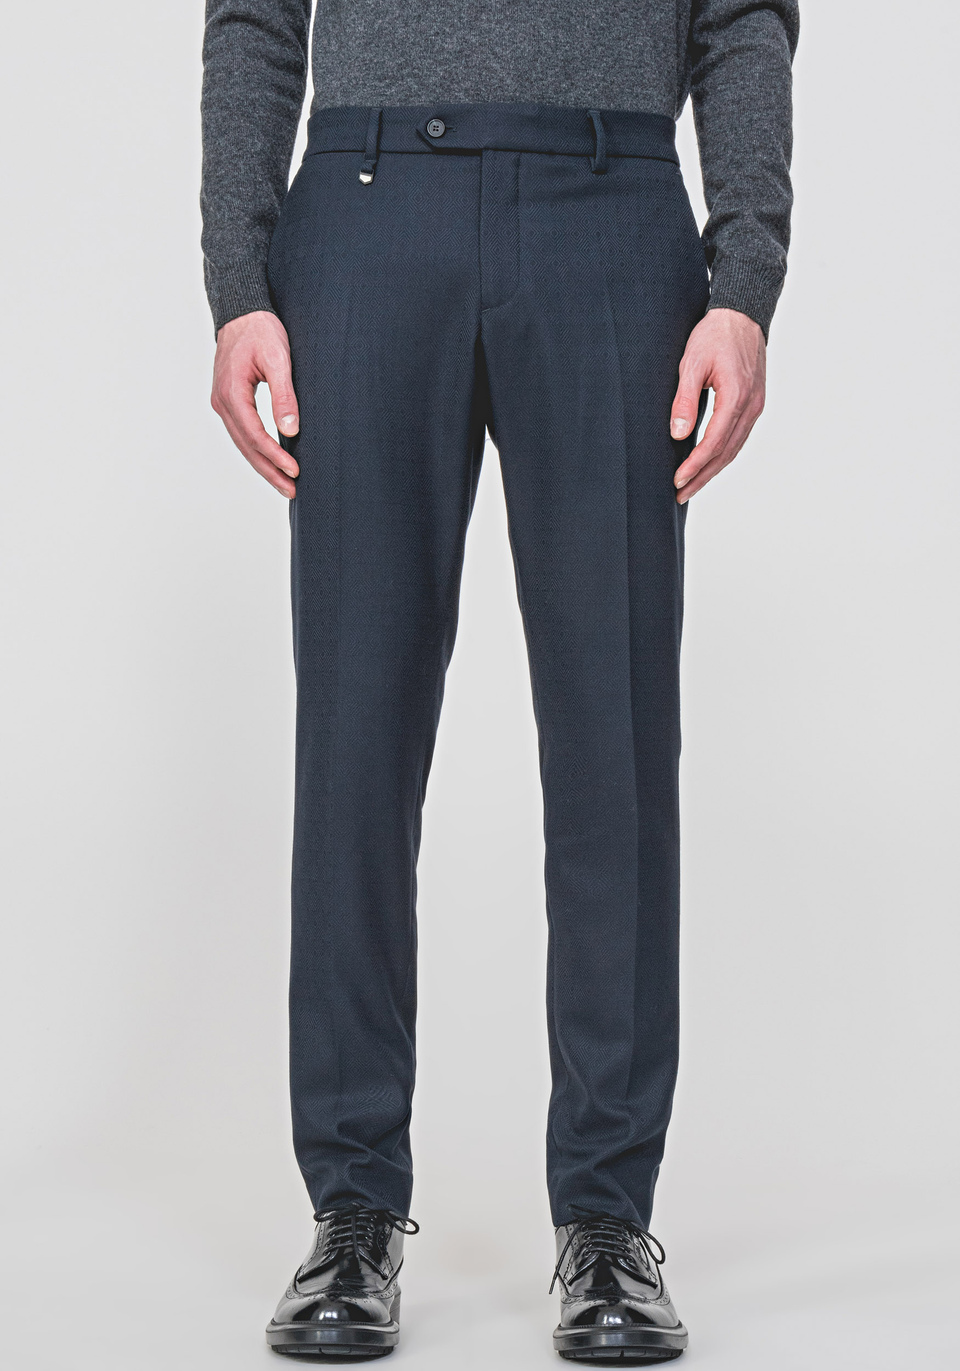 SKINNY-FIT “BRYAN” TROUSERS IN A STRETCH FABRIC WITH DIAMOND PATTERNING - Antony Morato Online Shop